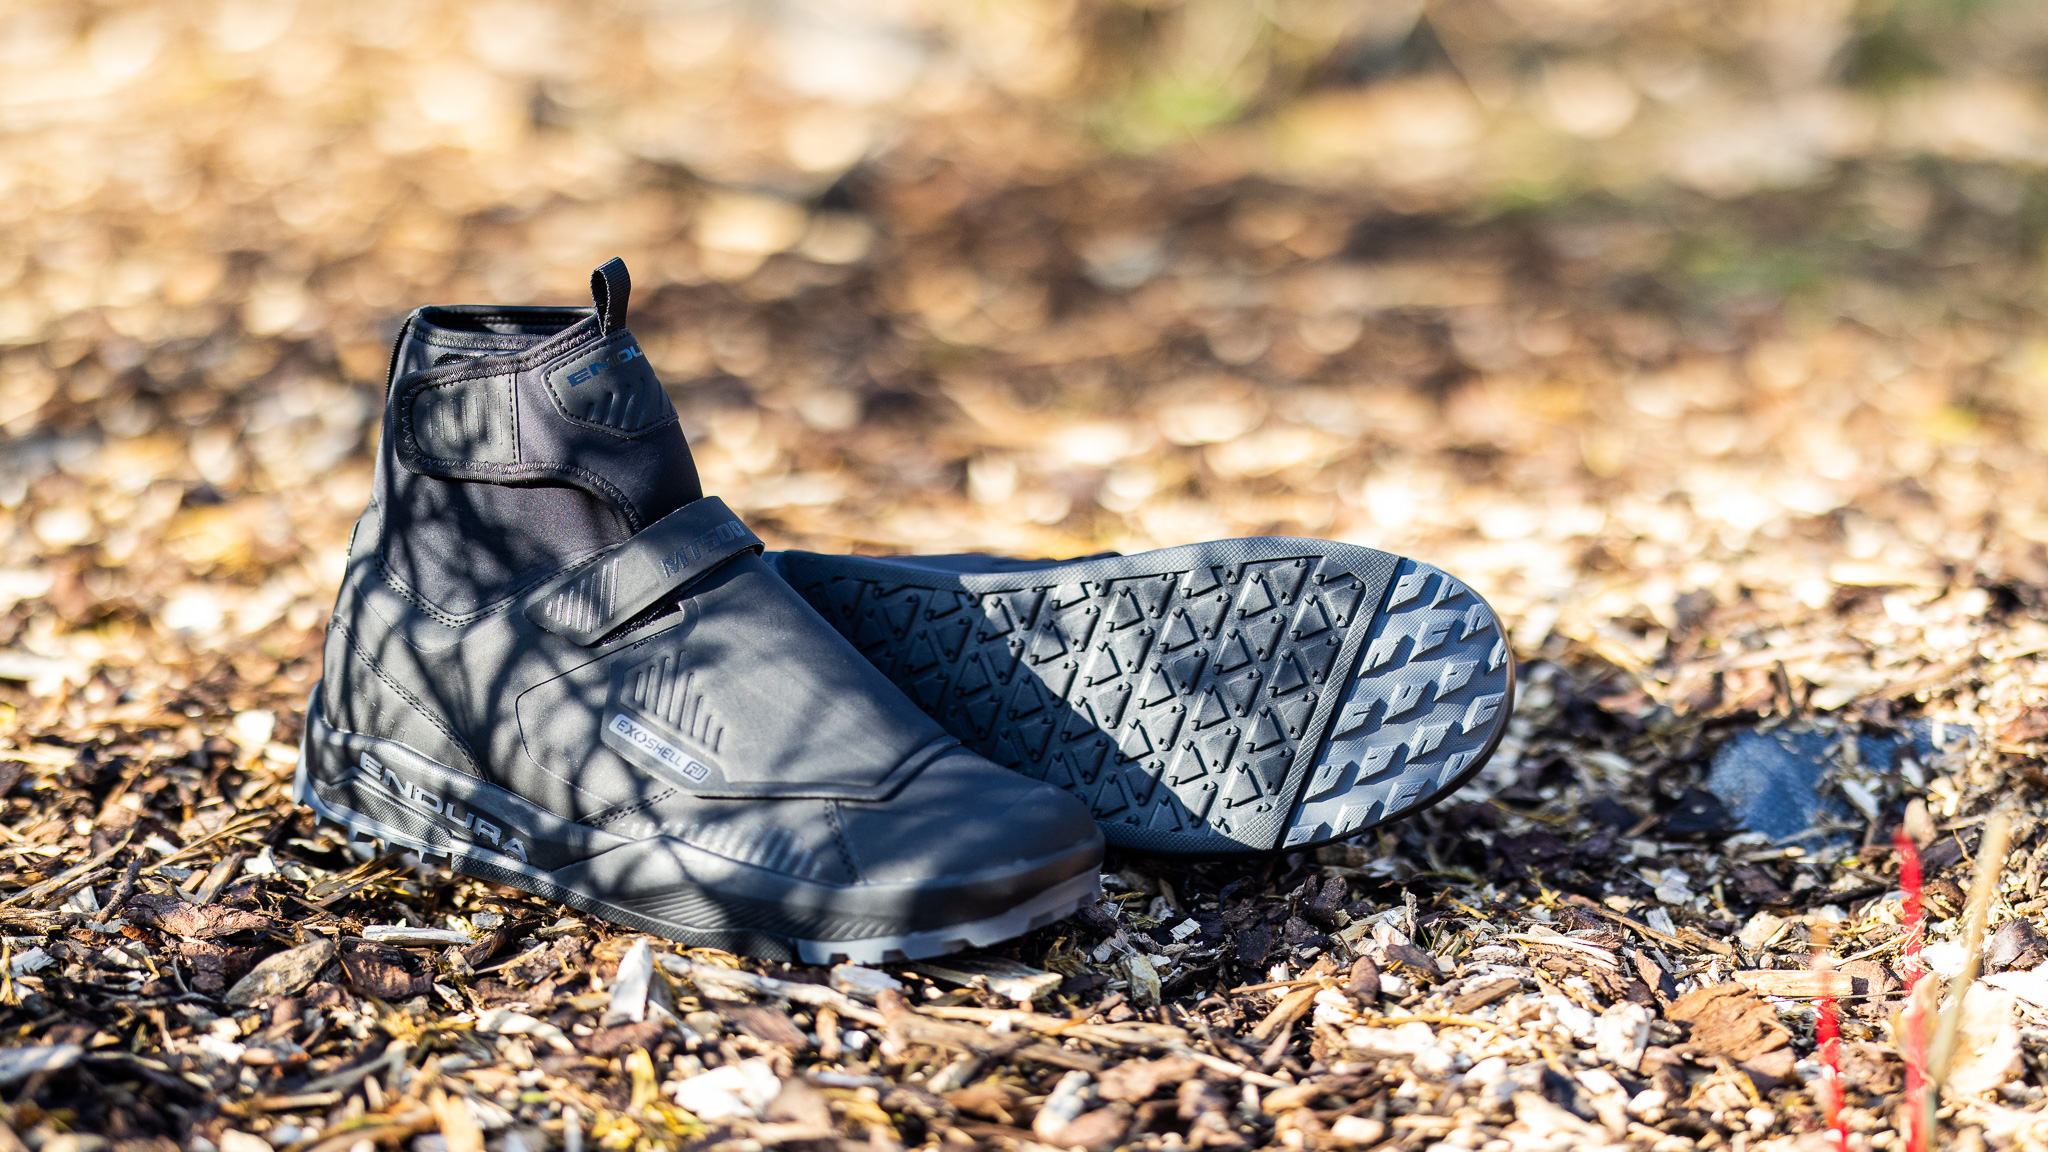 Endura to launch a new waterproof MT500 Burner shoe with flat and ...